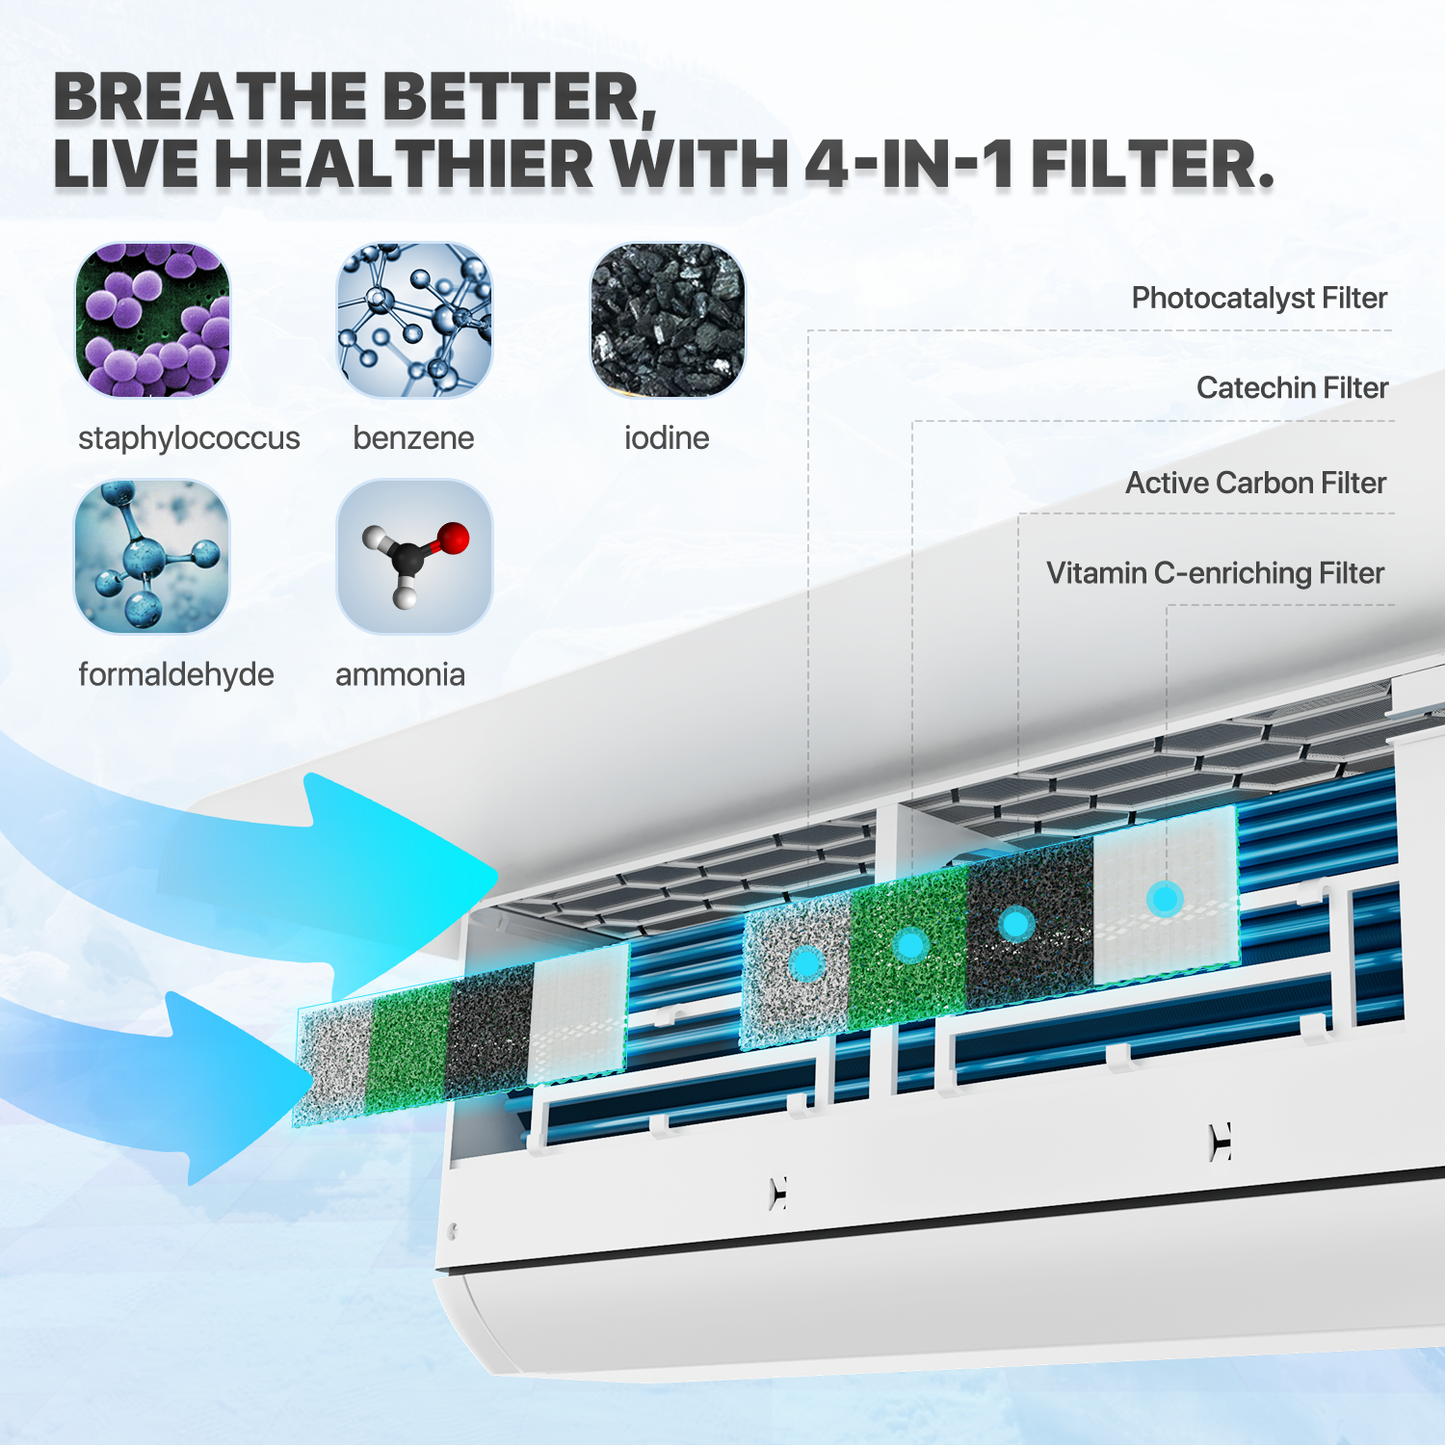 9000 BTU Split Air Conditioner - Cooling & Heating Function- WIFI APP Control - 4-in-1 filter